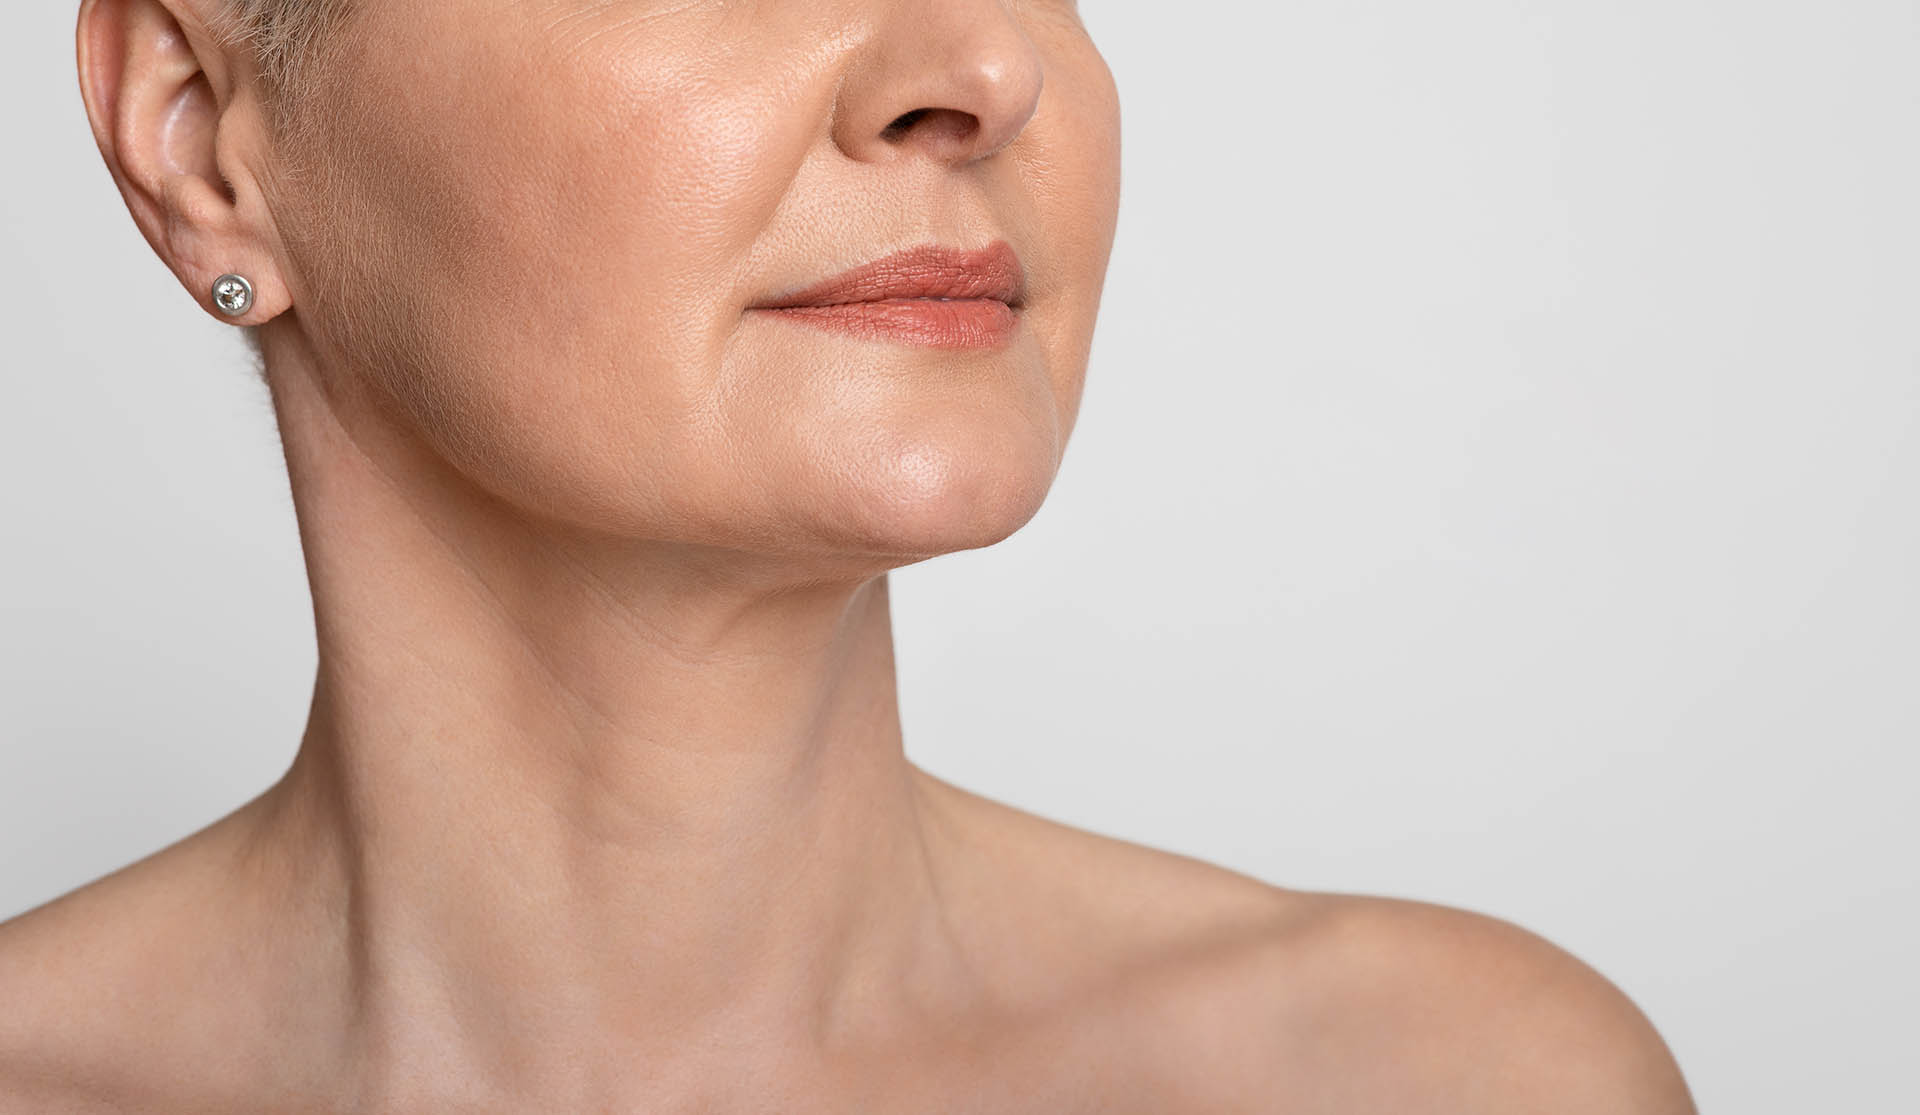 How To Improve Your Neck’s Appearance